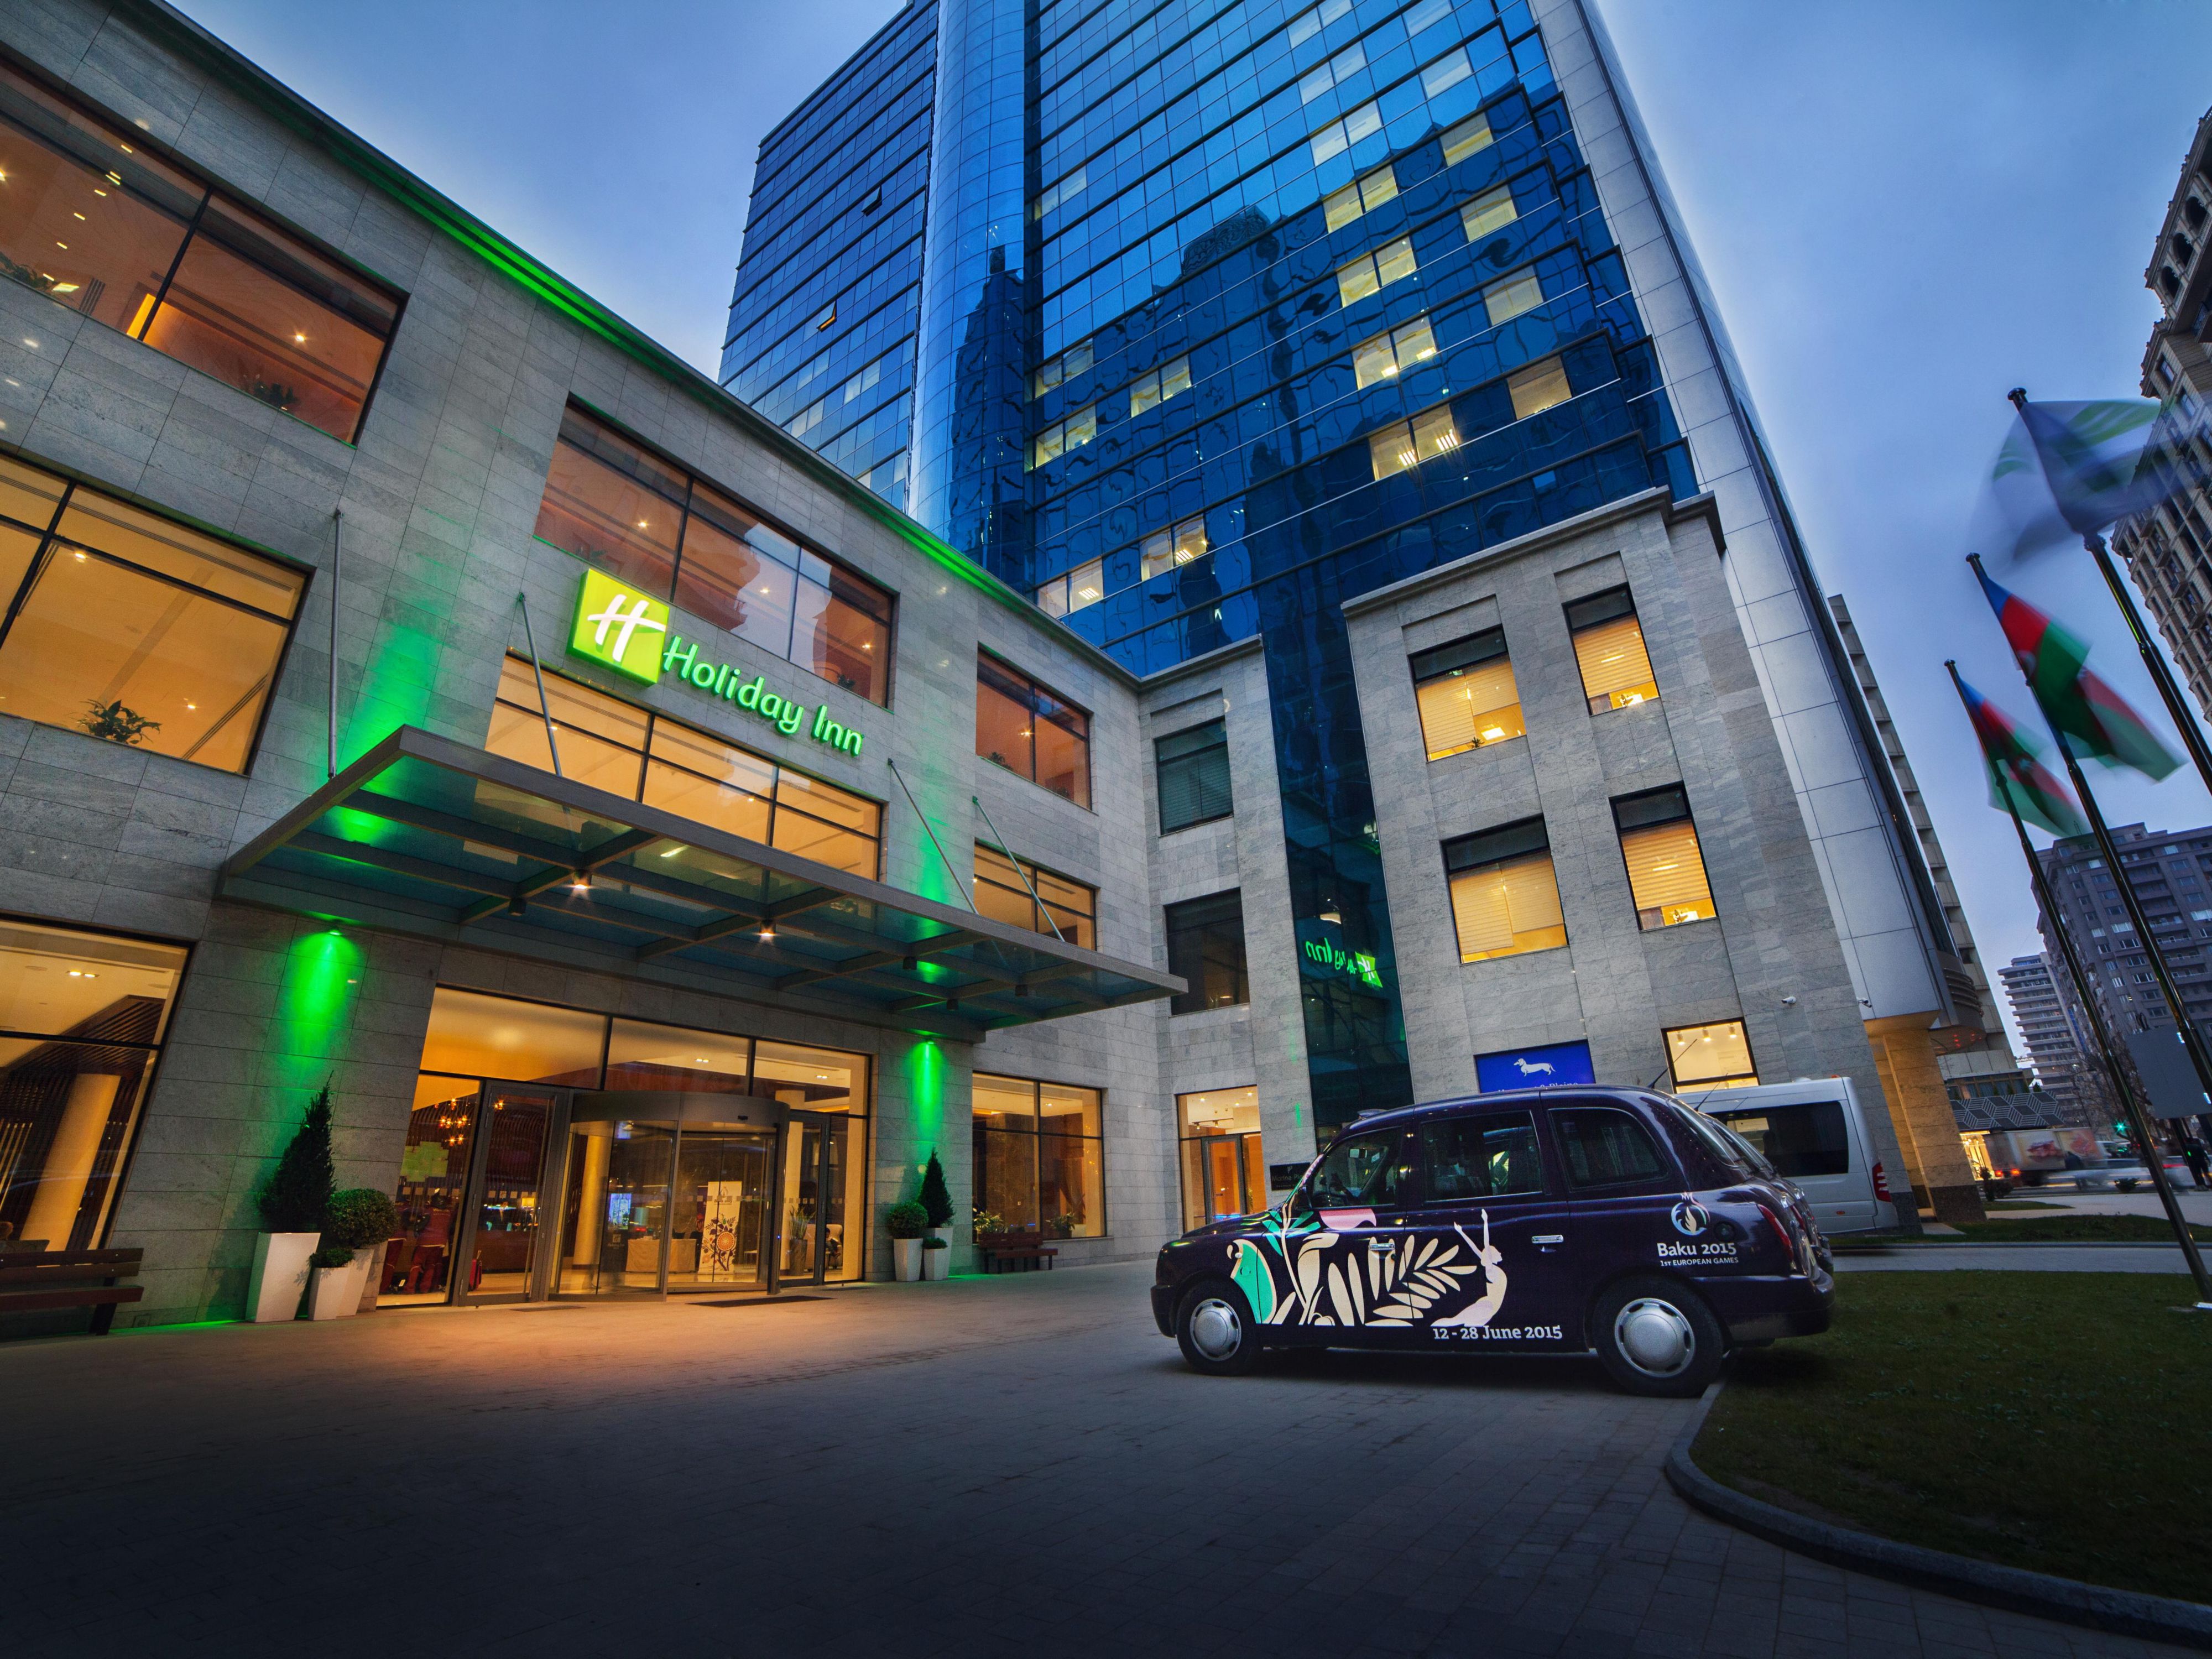 Located at the heart of Baku’s business and social district, Holiday Inn Baku is the ideal choice for business and leisure travellers